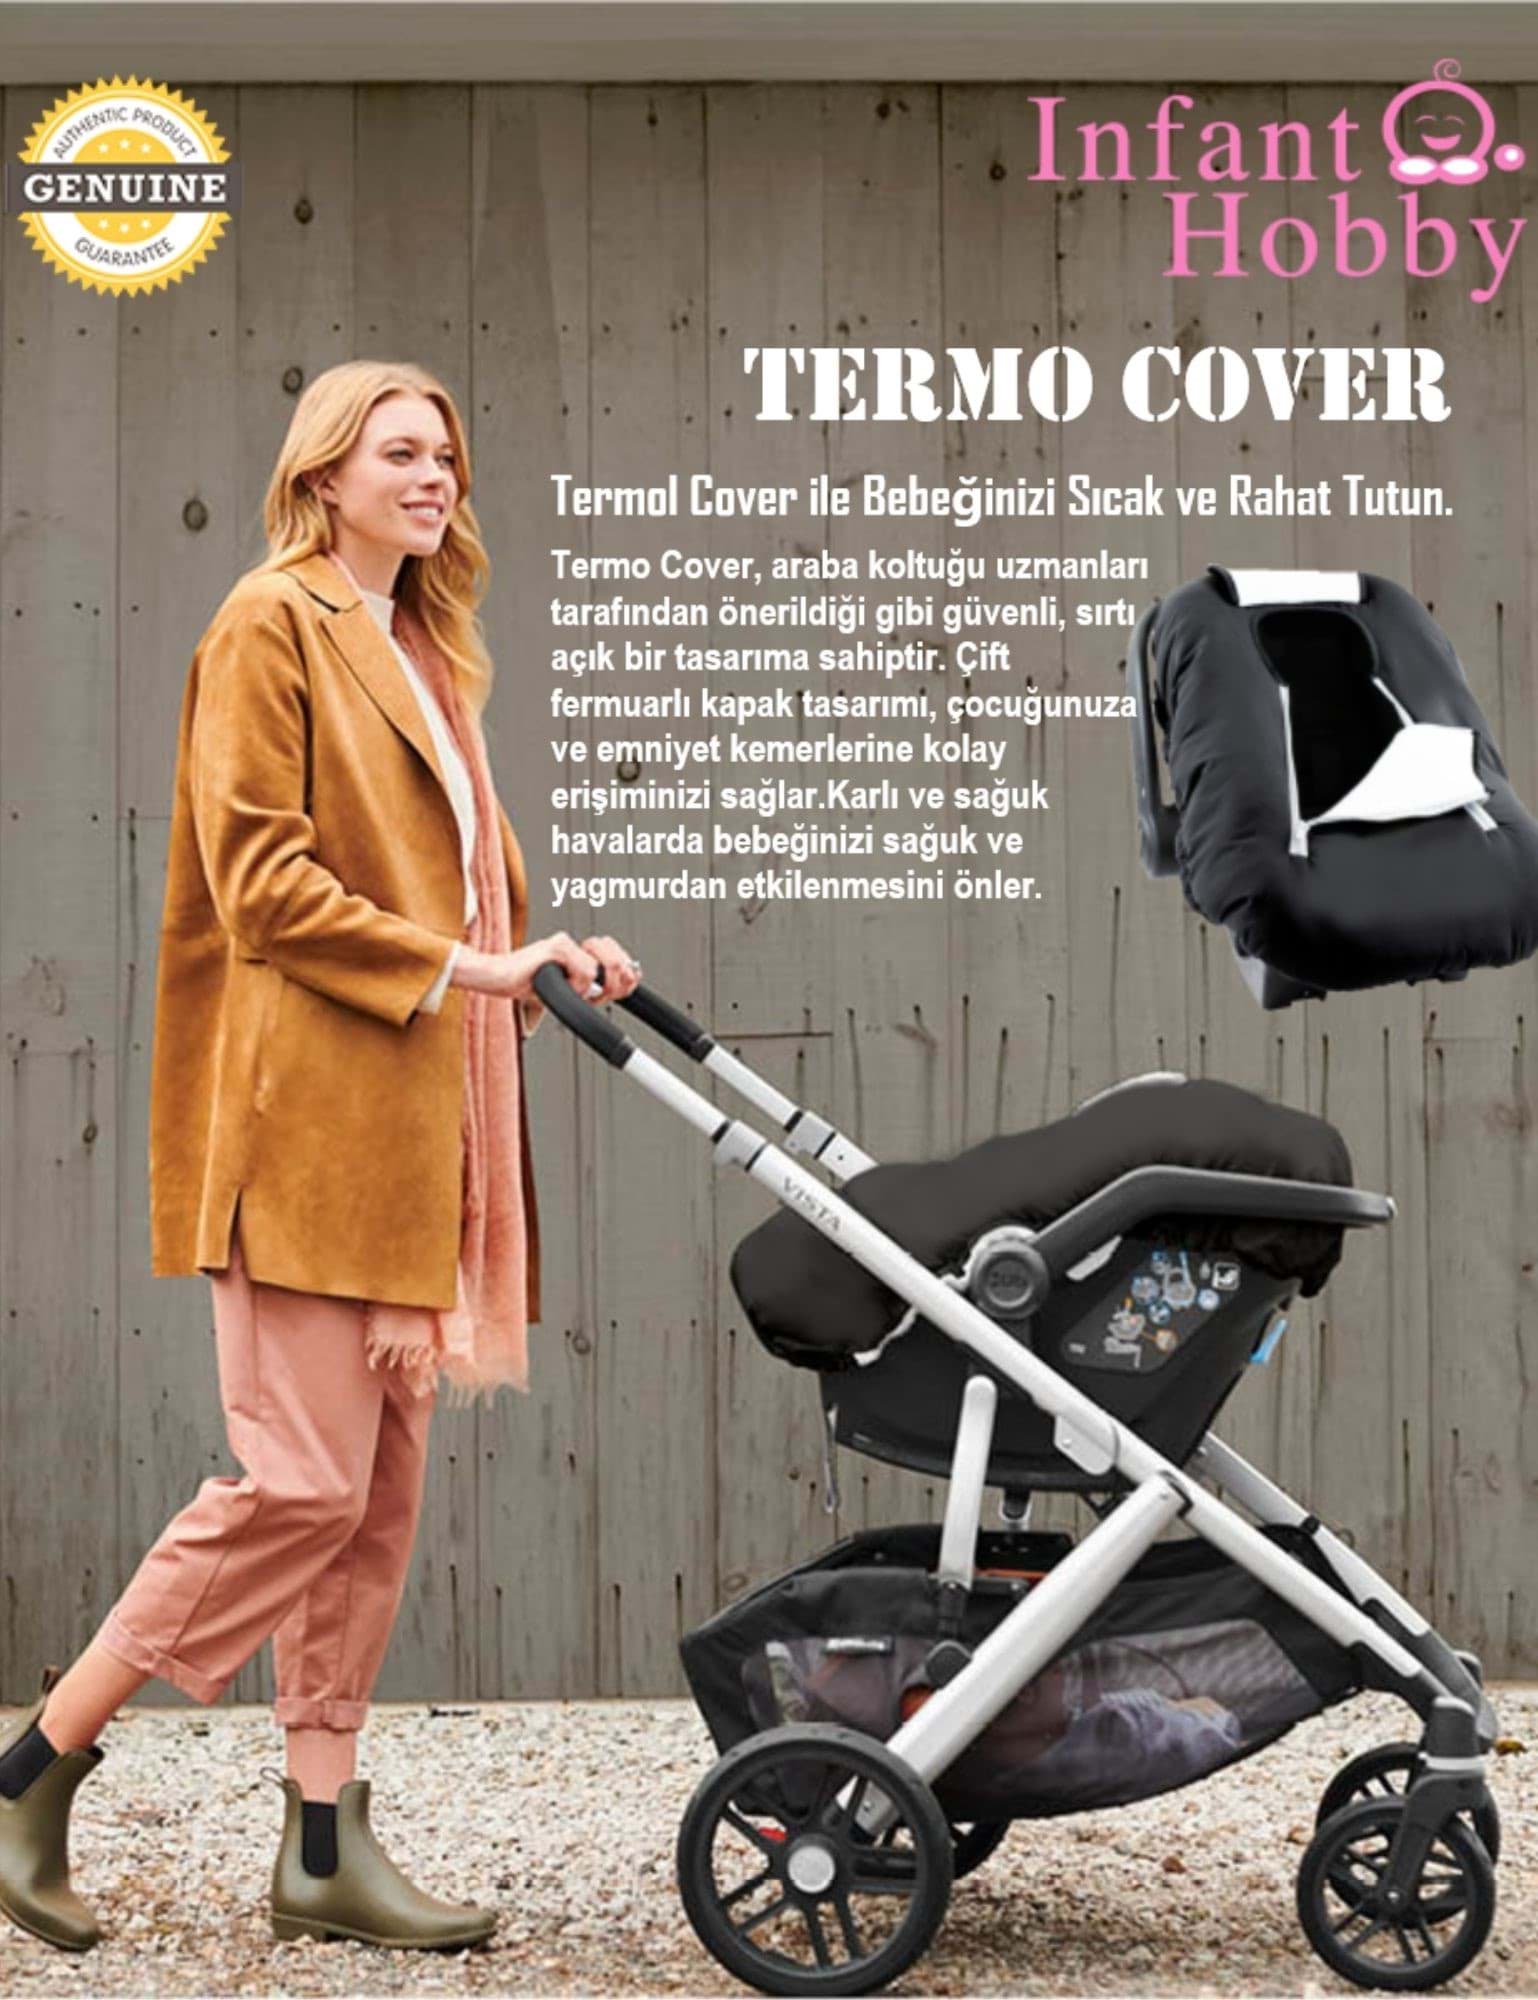 Picture of İNFANT HOBBY THERMO COVER PUSET TULUMU & PUSET ÖRTÜSÜ